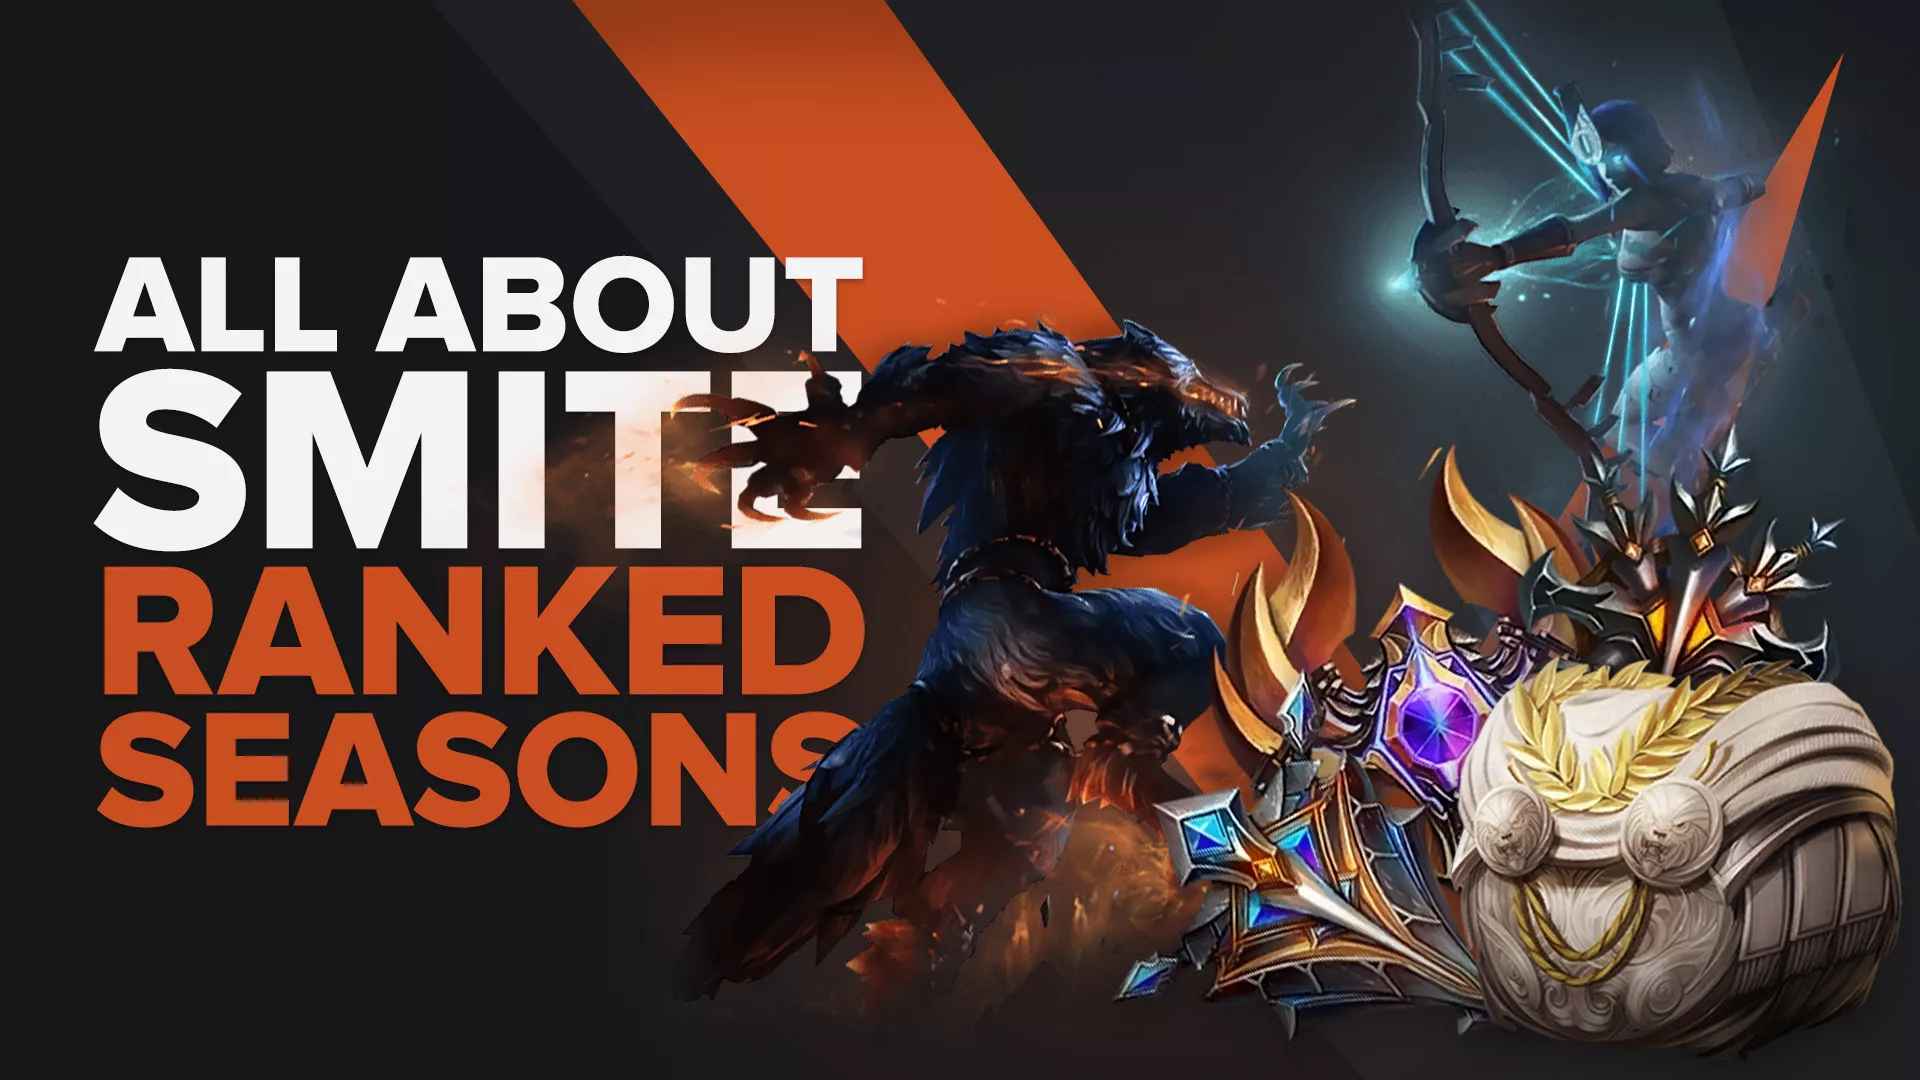 Ranked Seasons in Smite: Everything You Need to Know (Duration, Rewards, etc...)